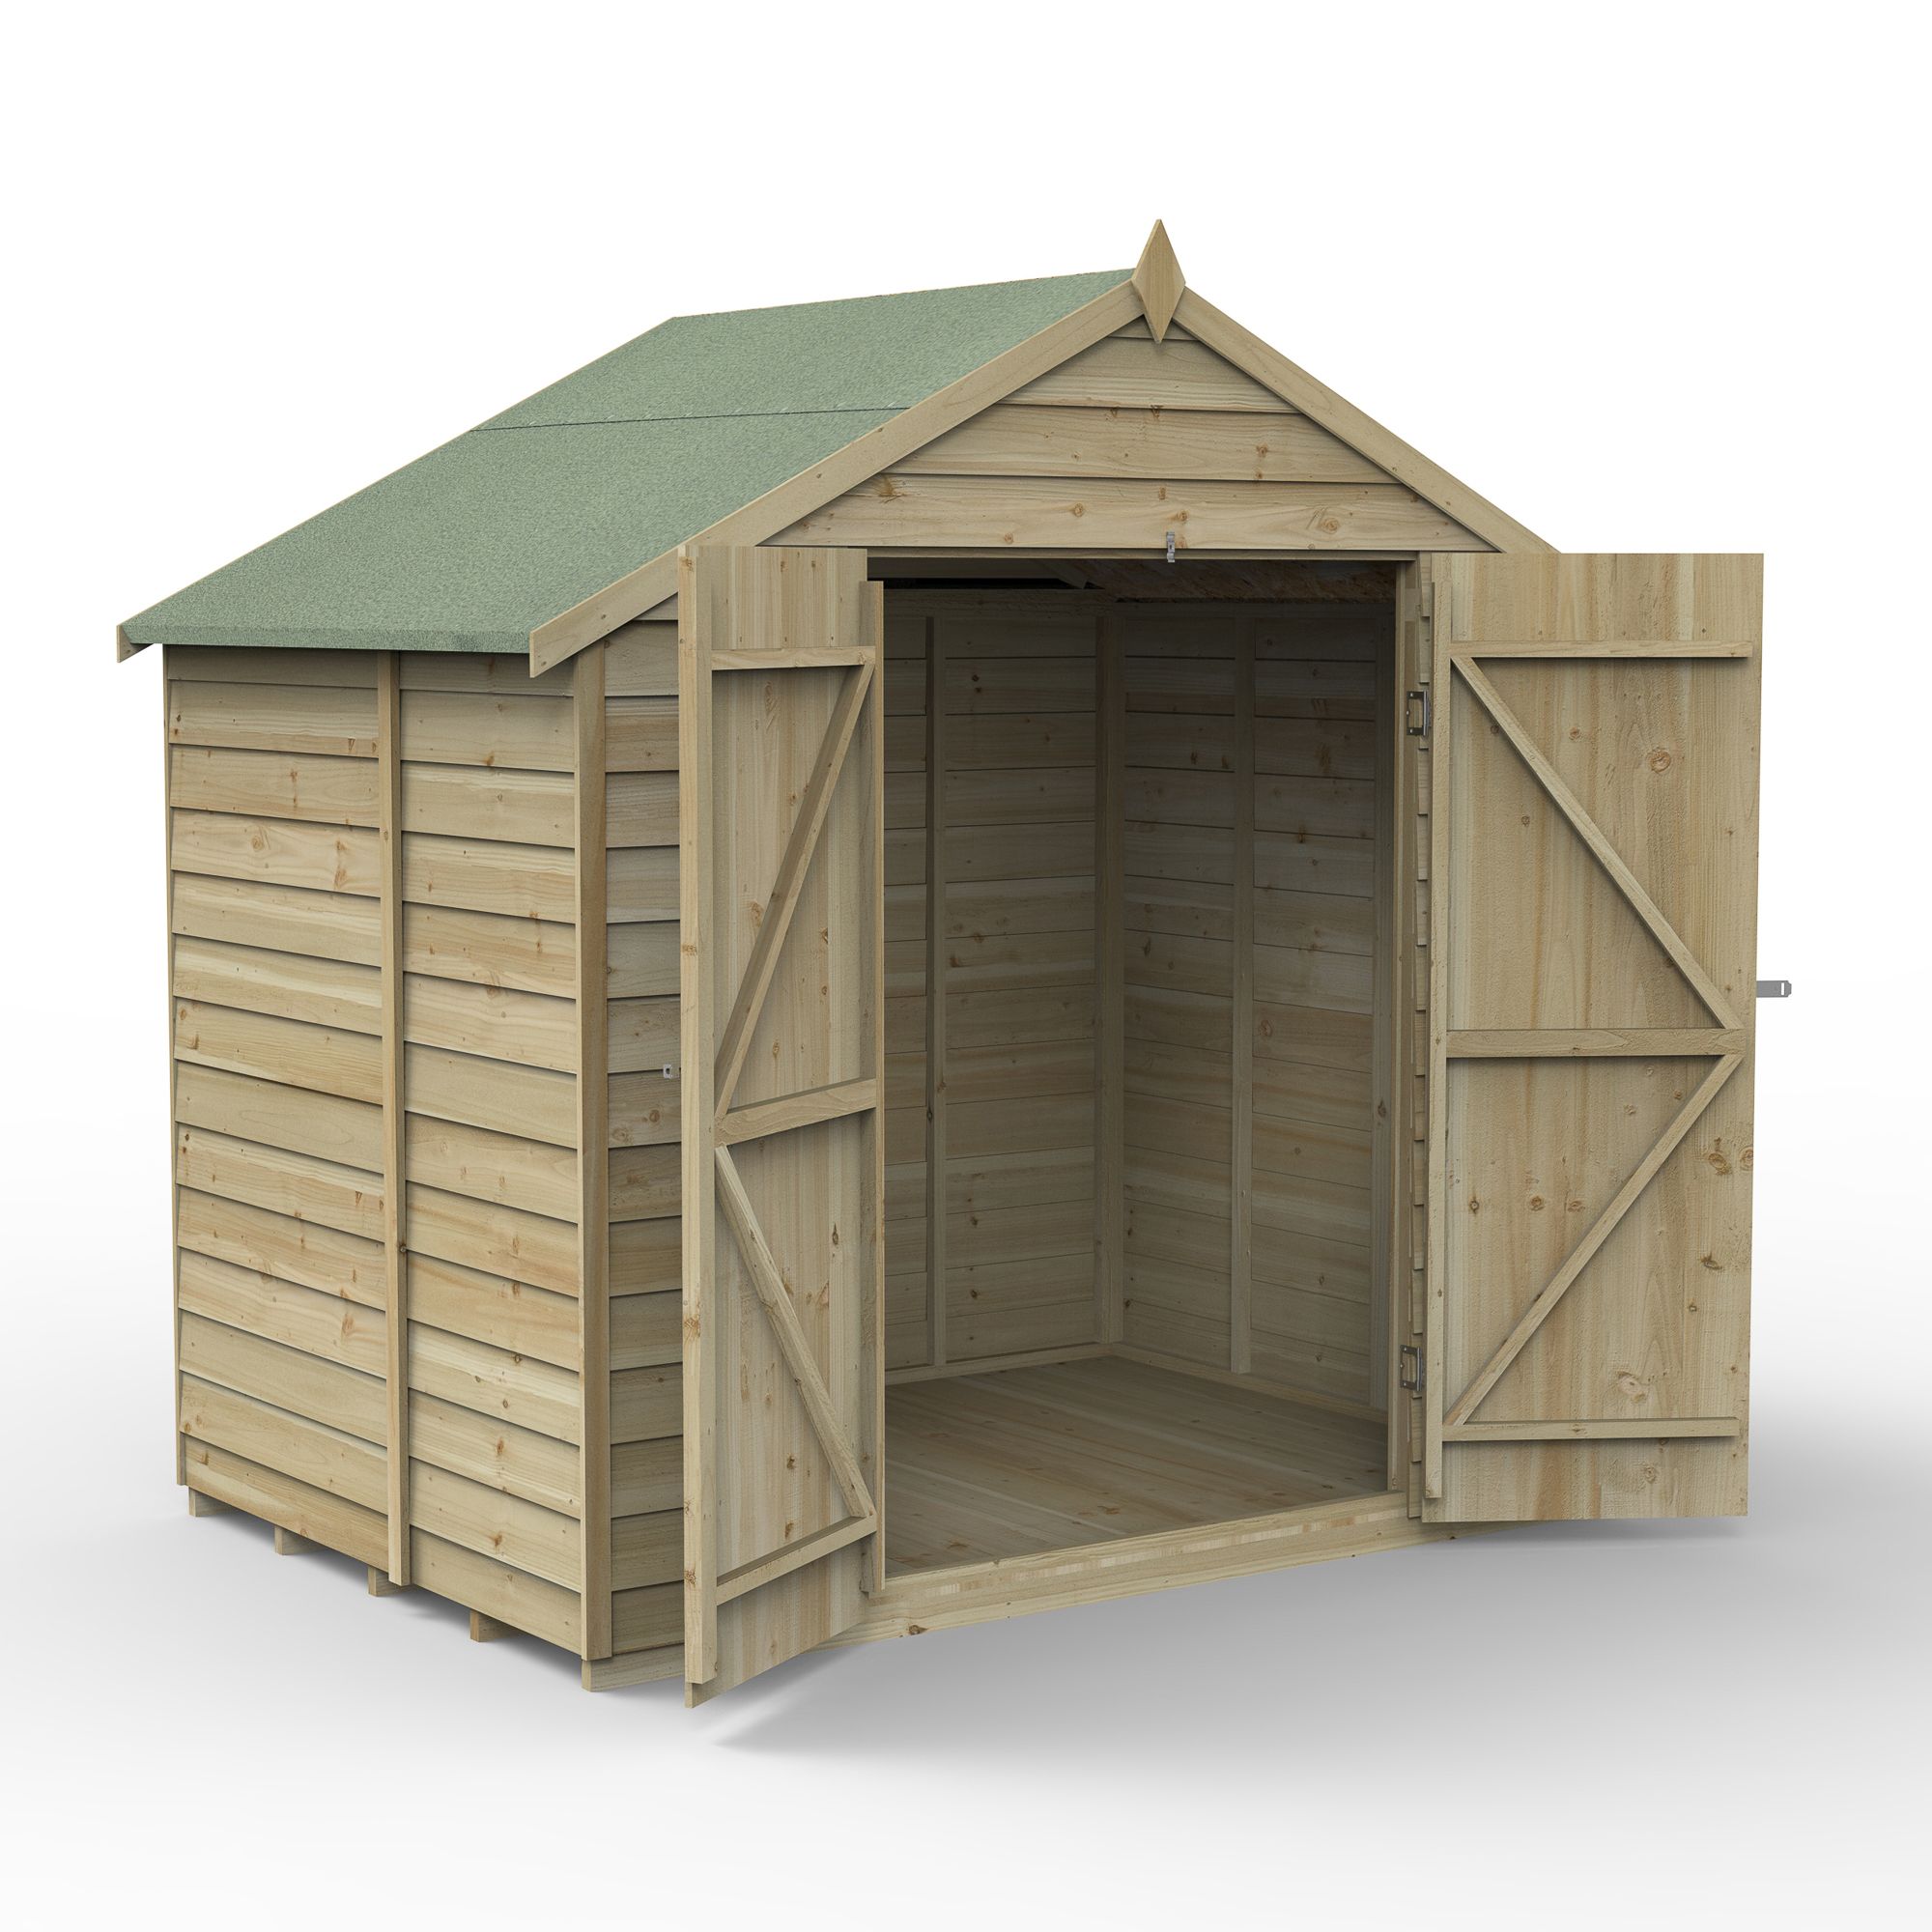 Forest Garden 7X5 Ft Apex Overlap Wooden Shed With Floor